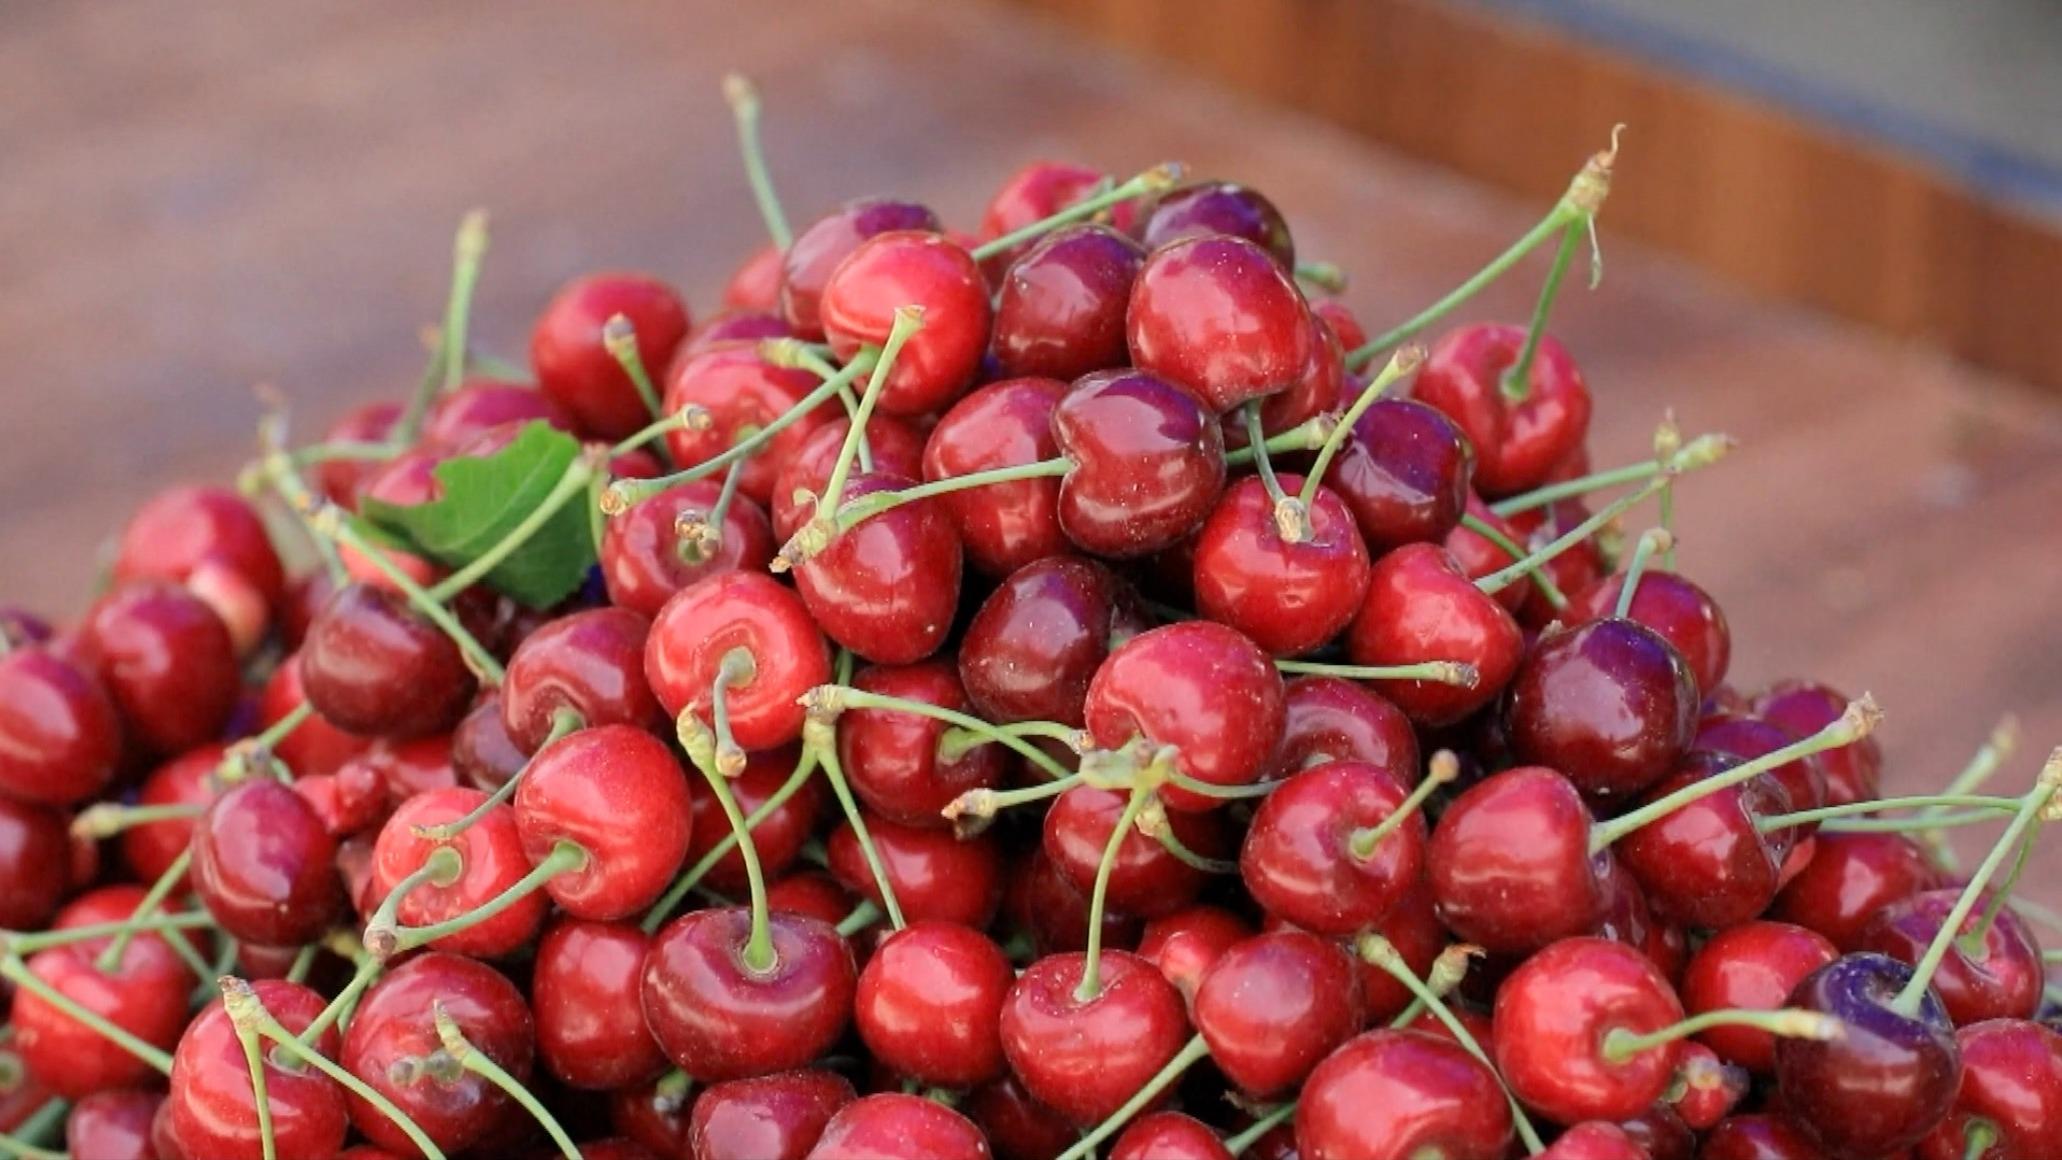 Cherry growing helps increase income, boost rural tourism in Shache